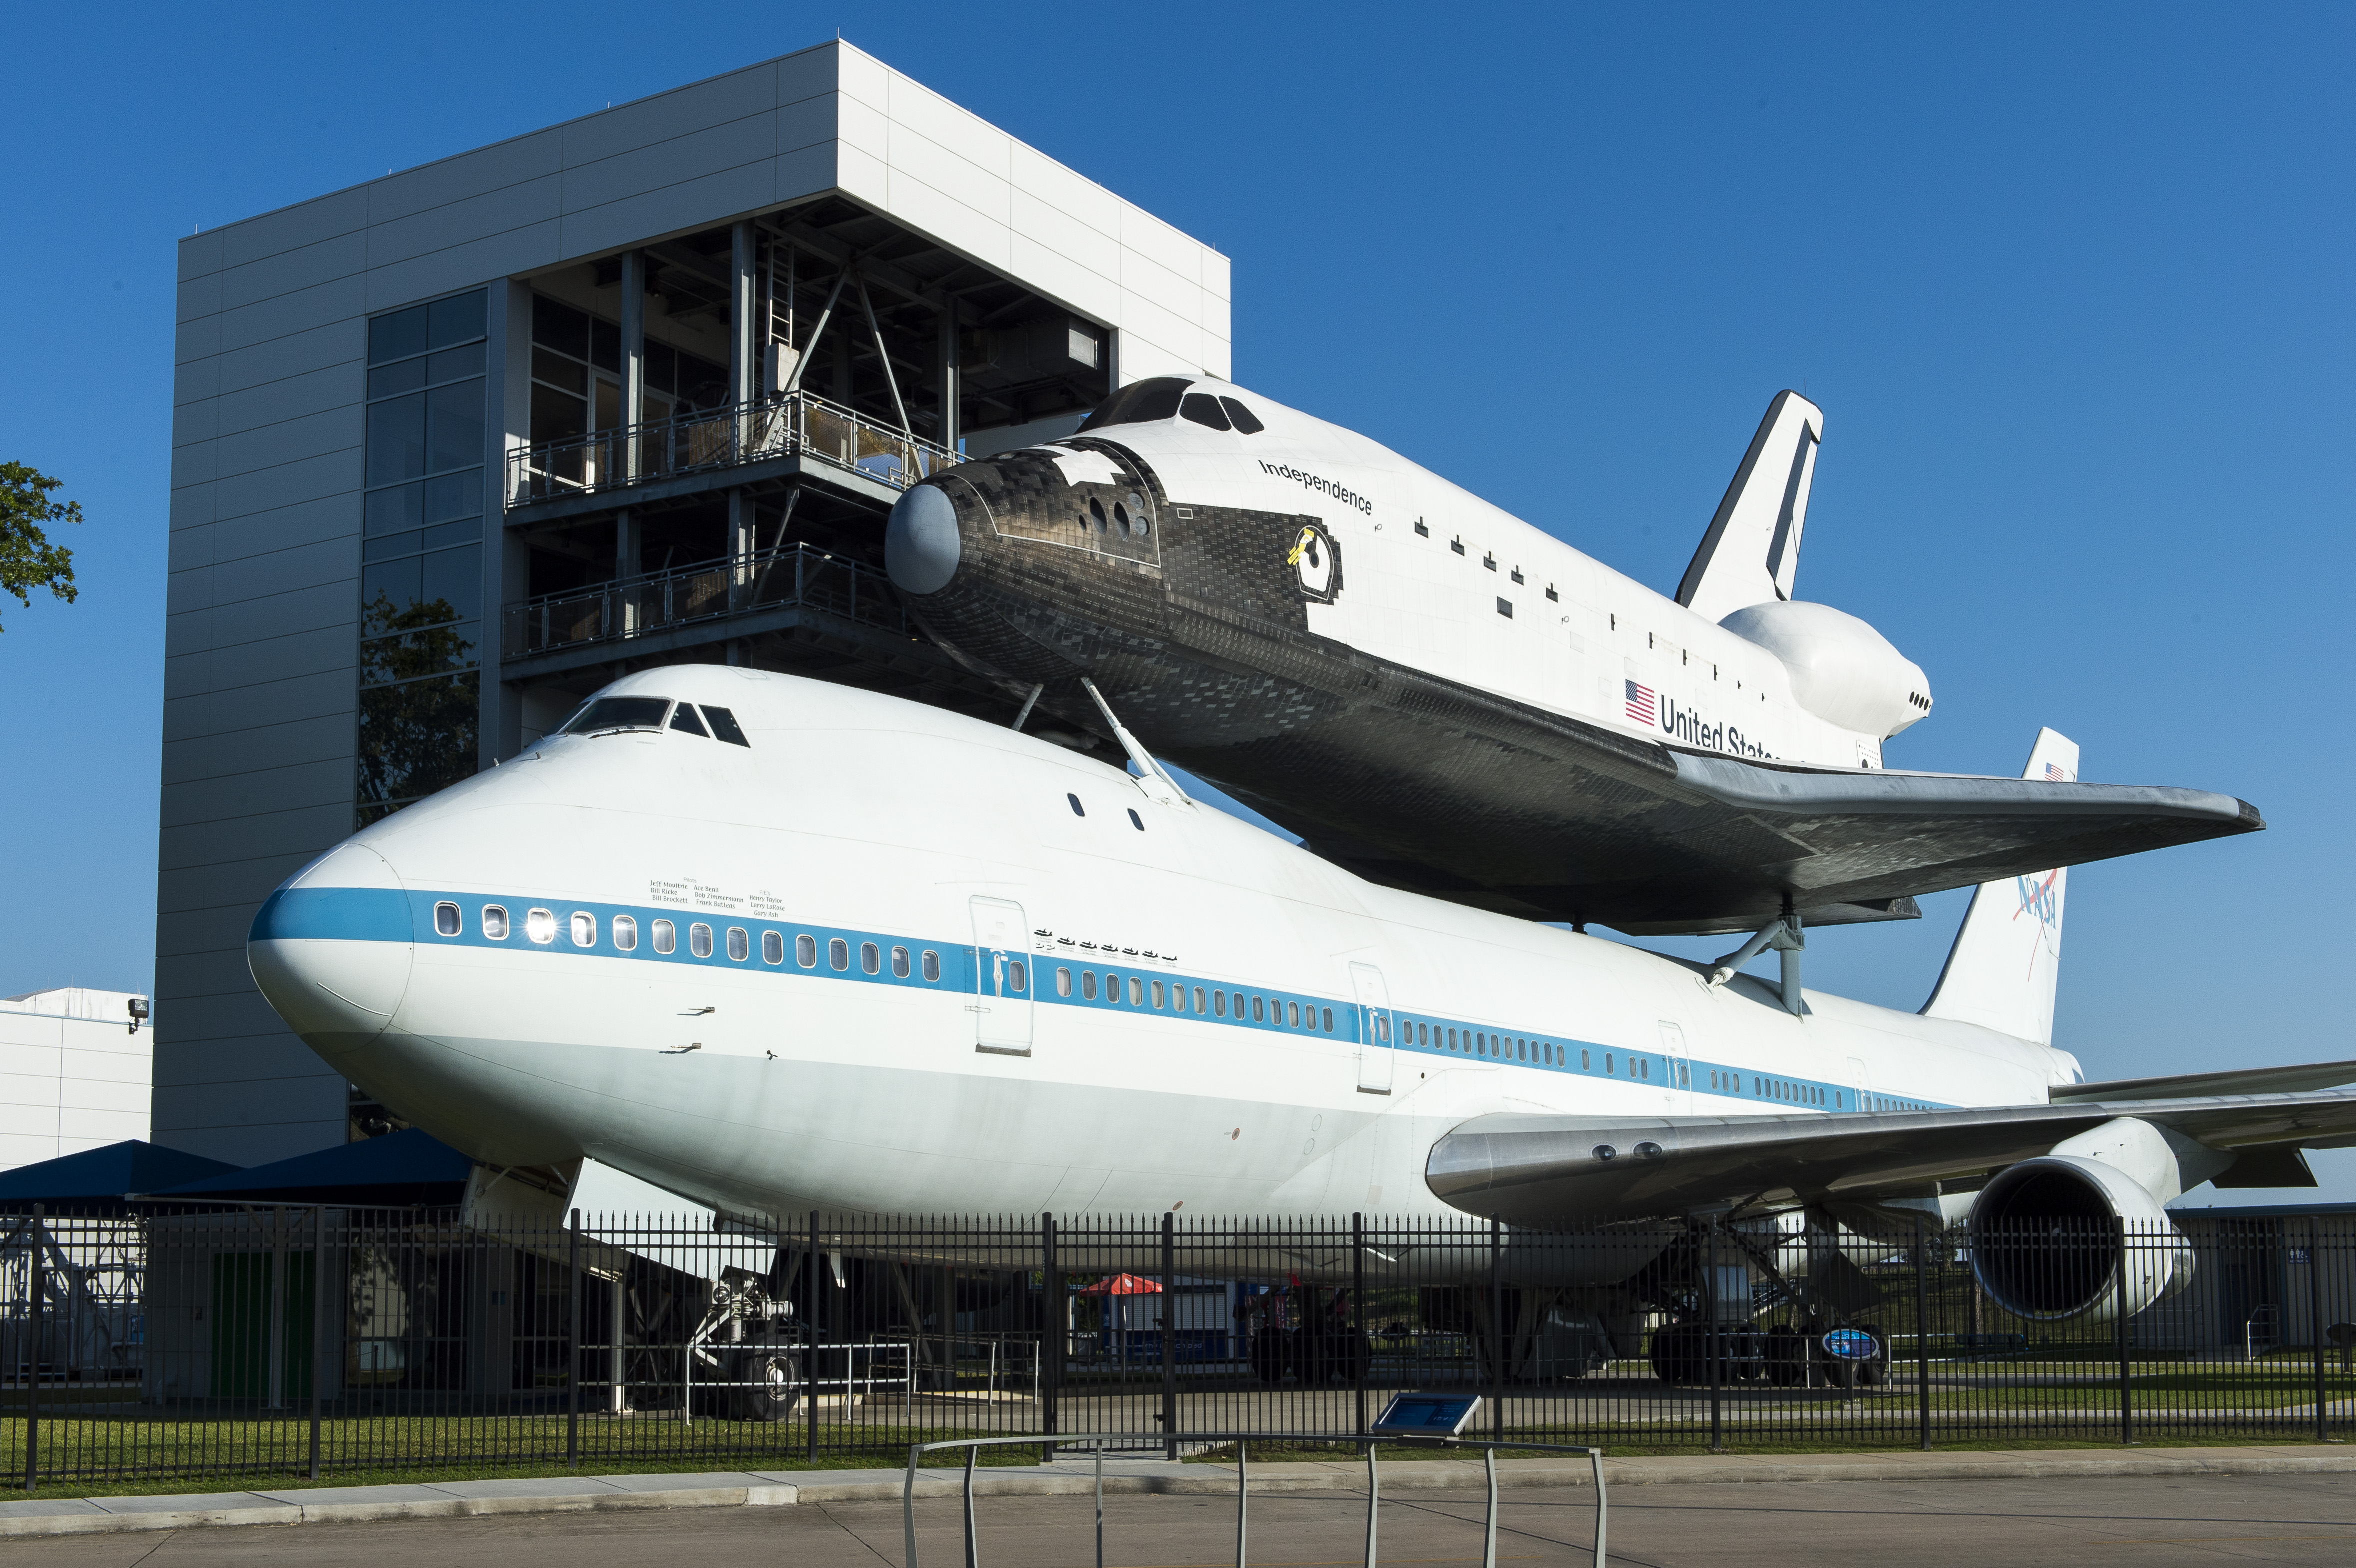 Space Center Houston | Things To Do In Houston, Tx